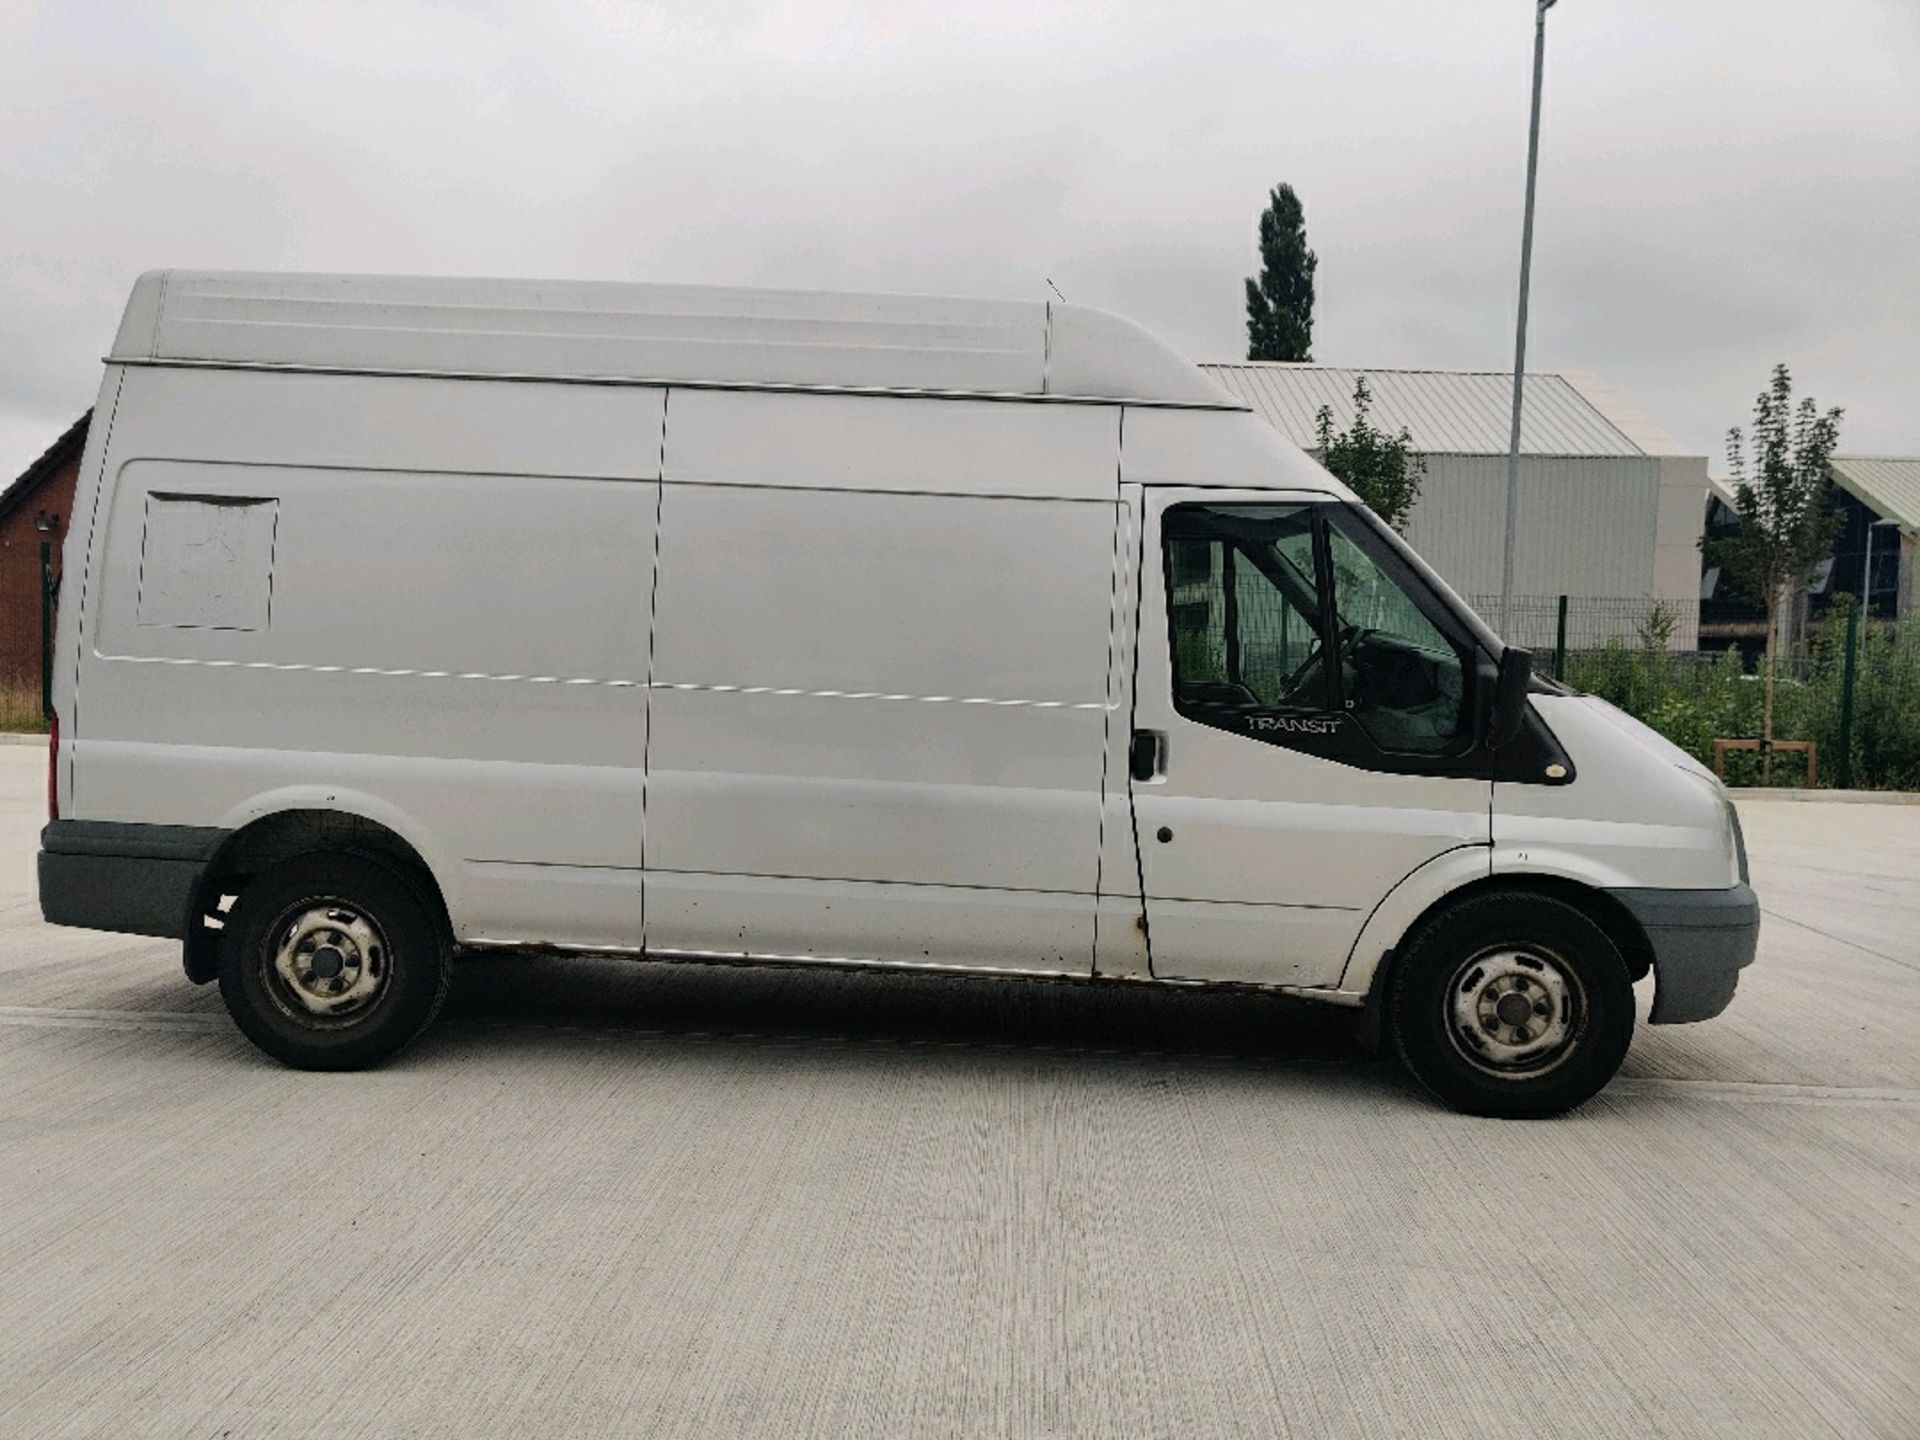 ENTRY DIRECT FROM LOCAL AUTHORITY Ford transit YG59OYU